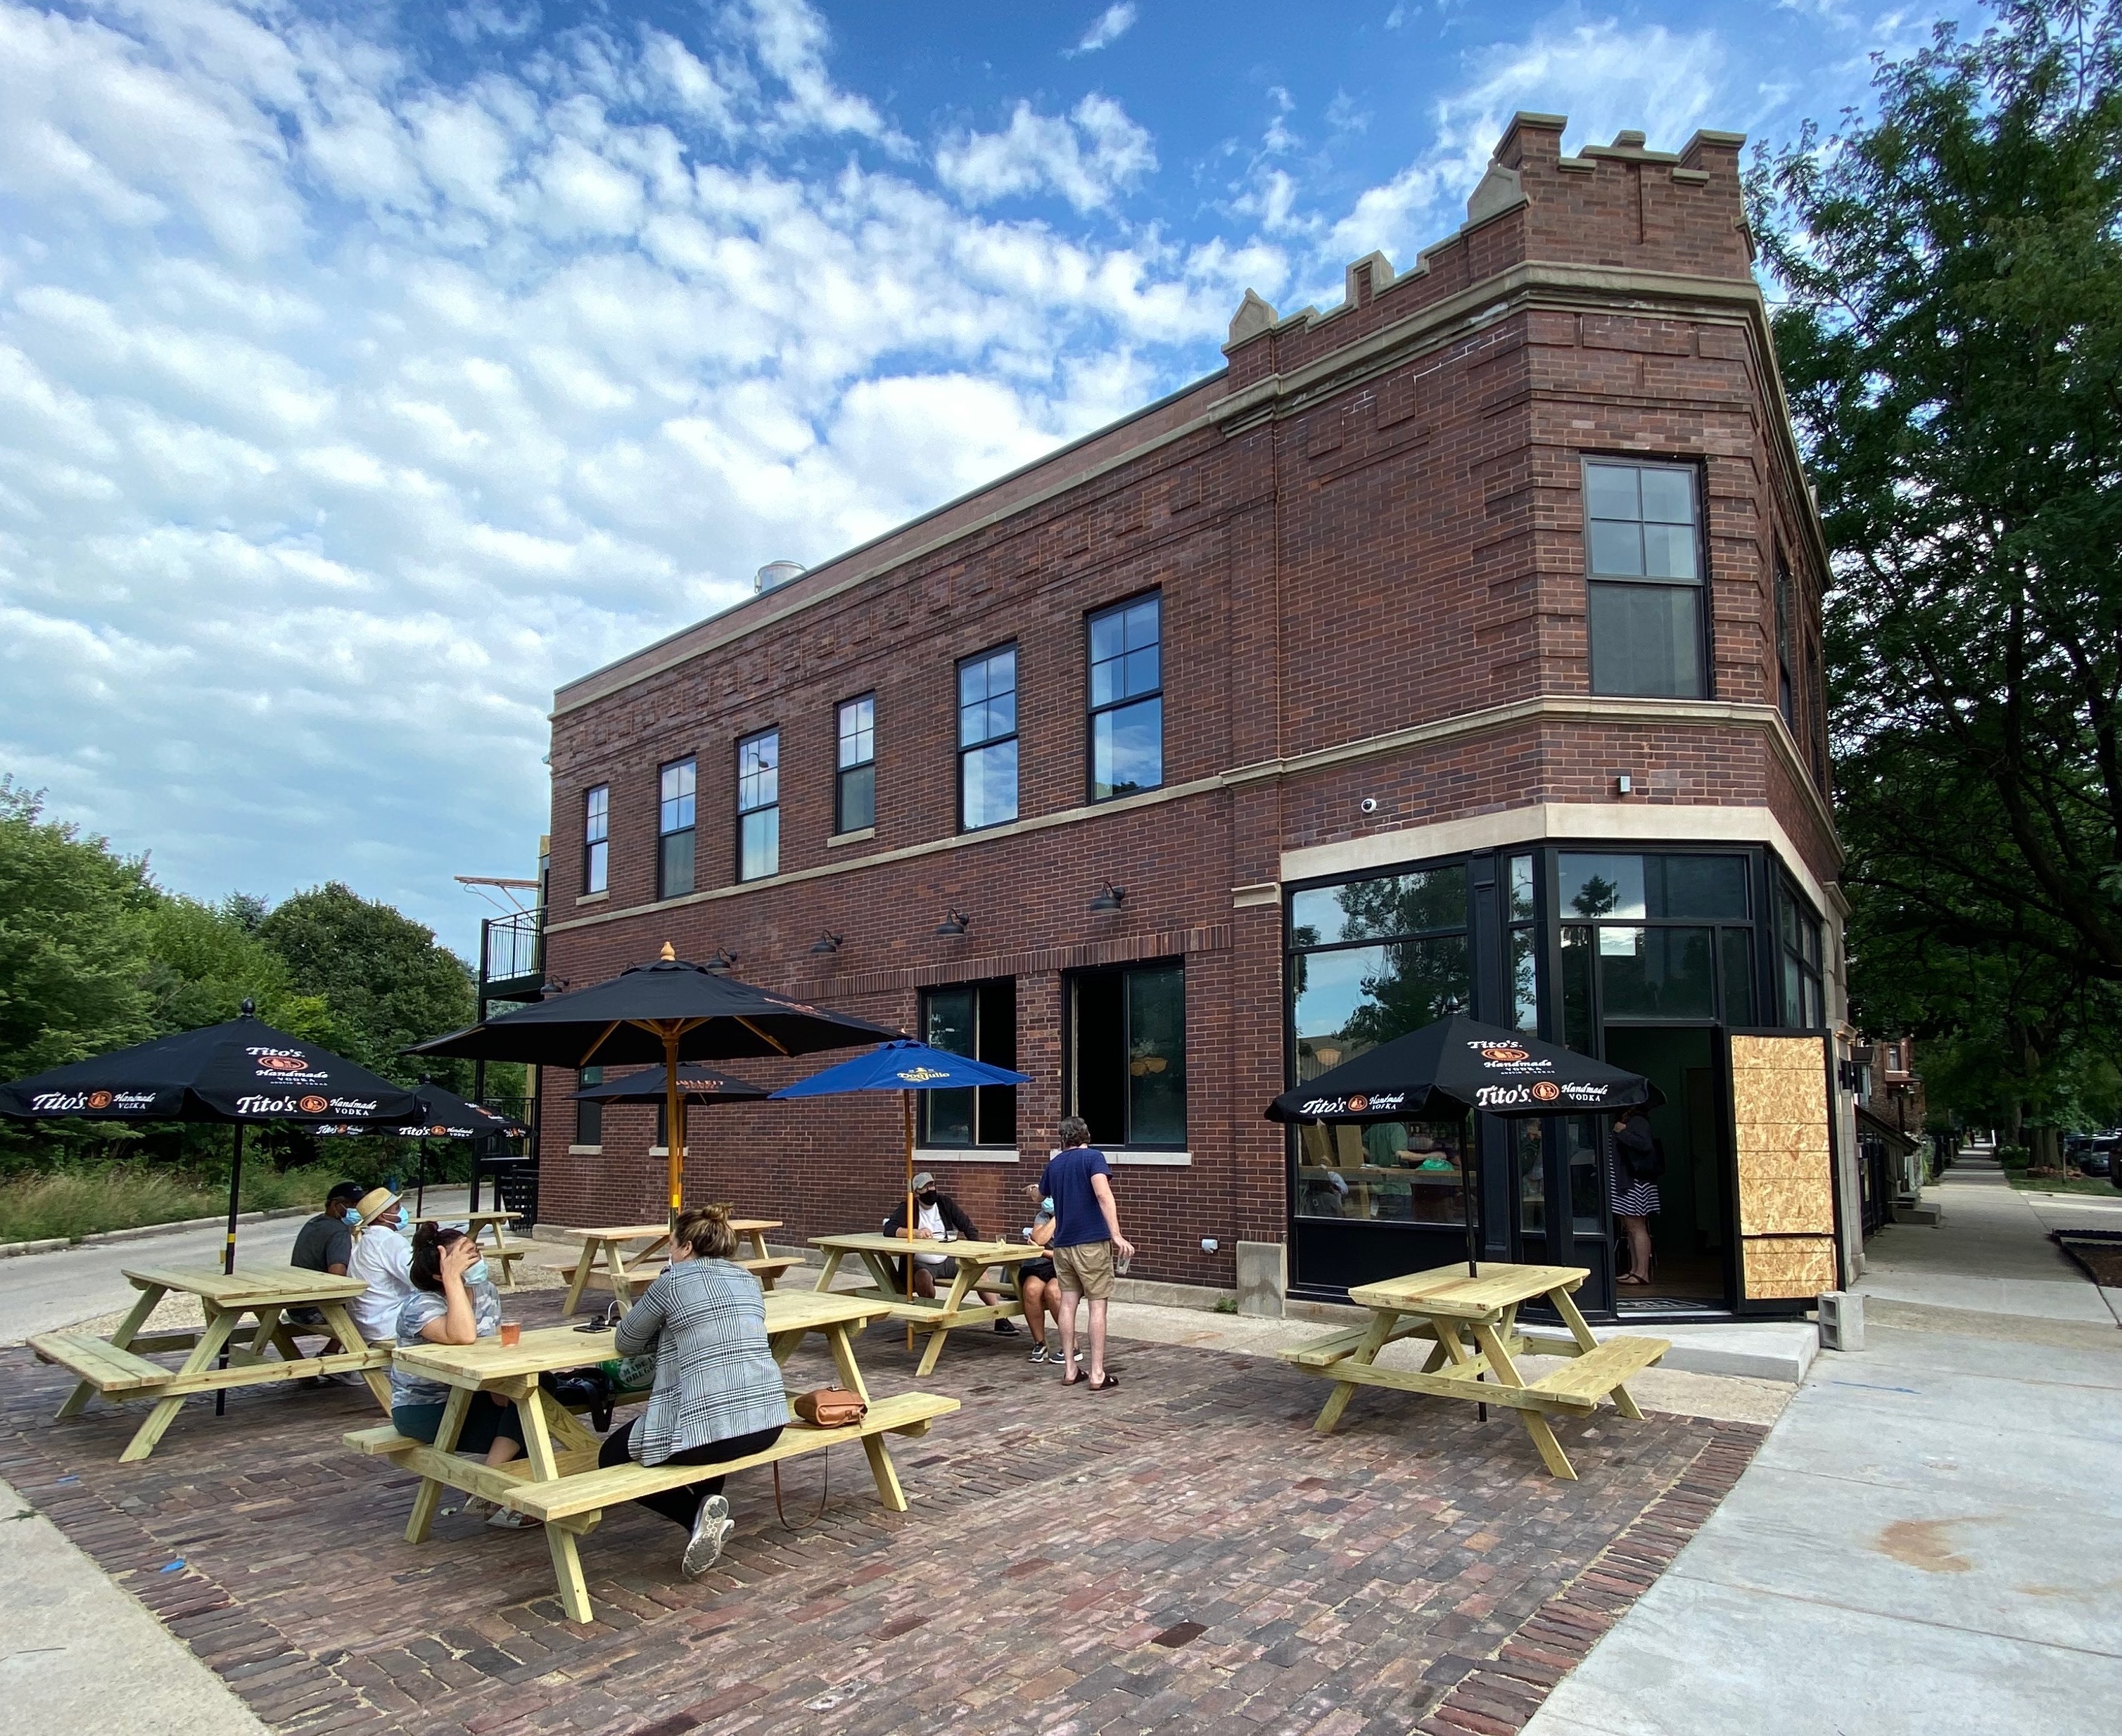 A large brick building with picnic tables